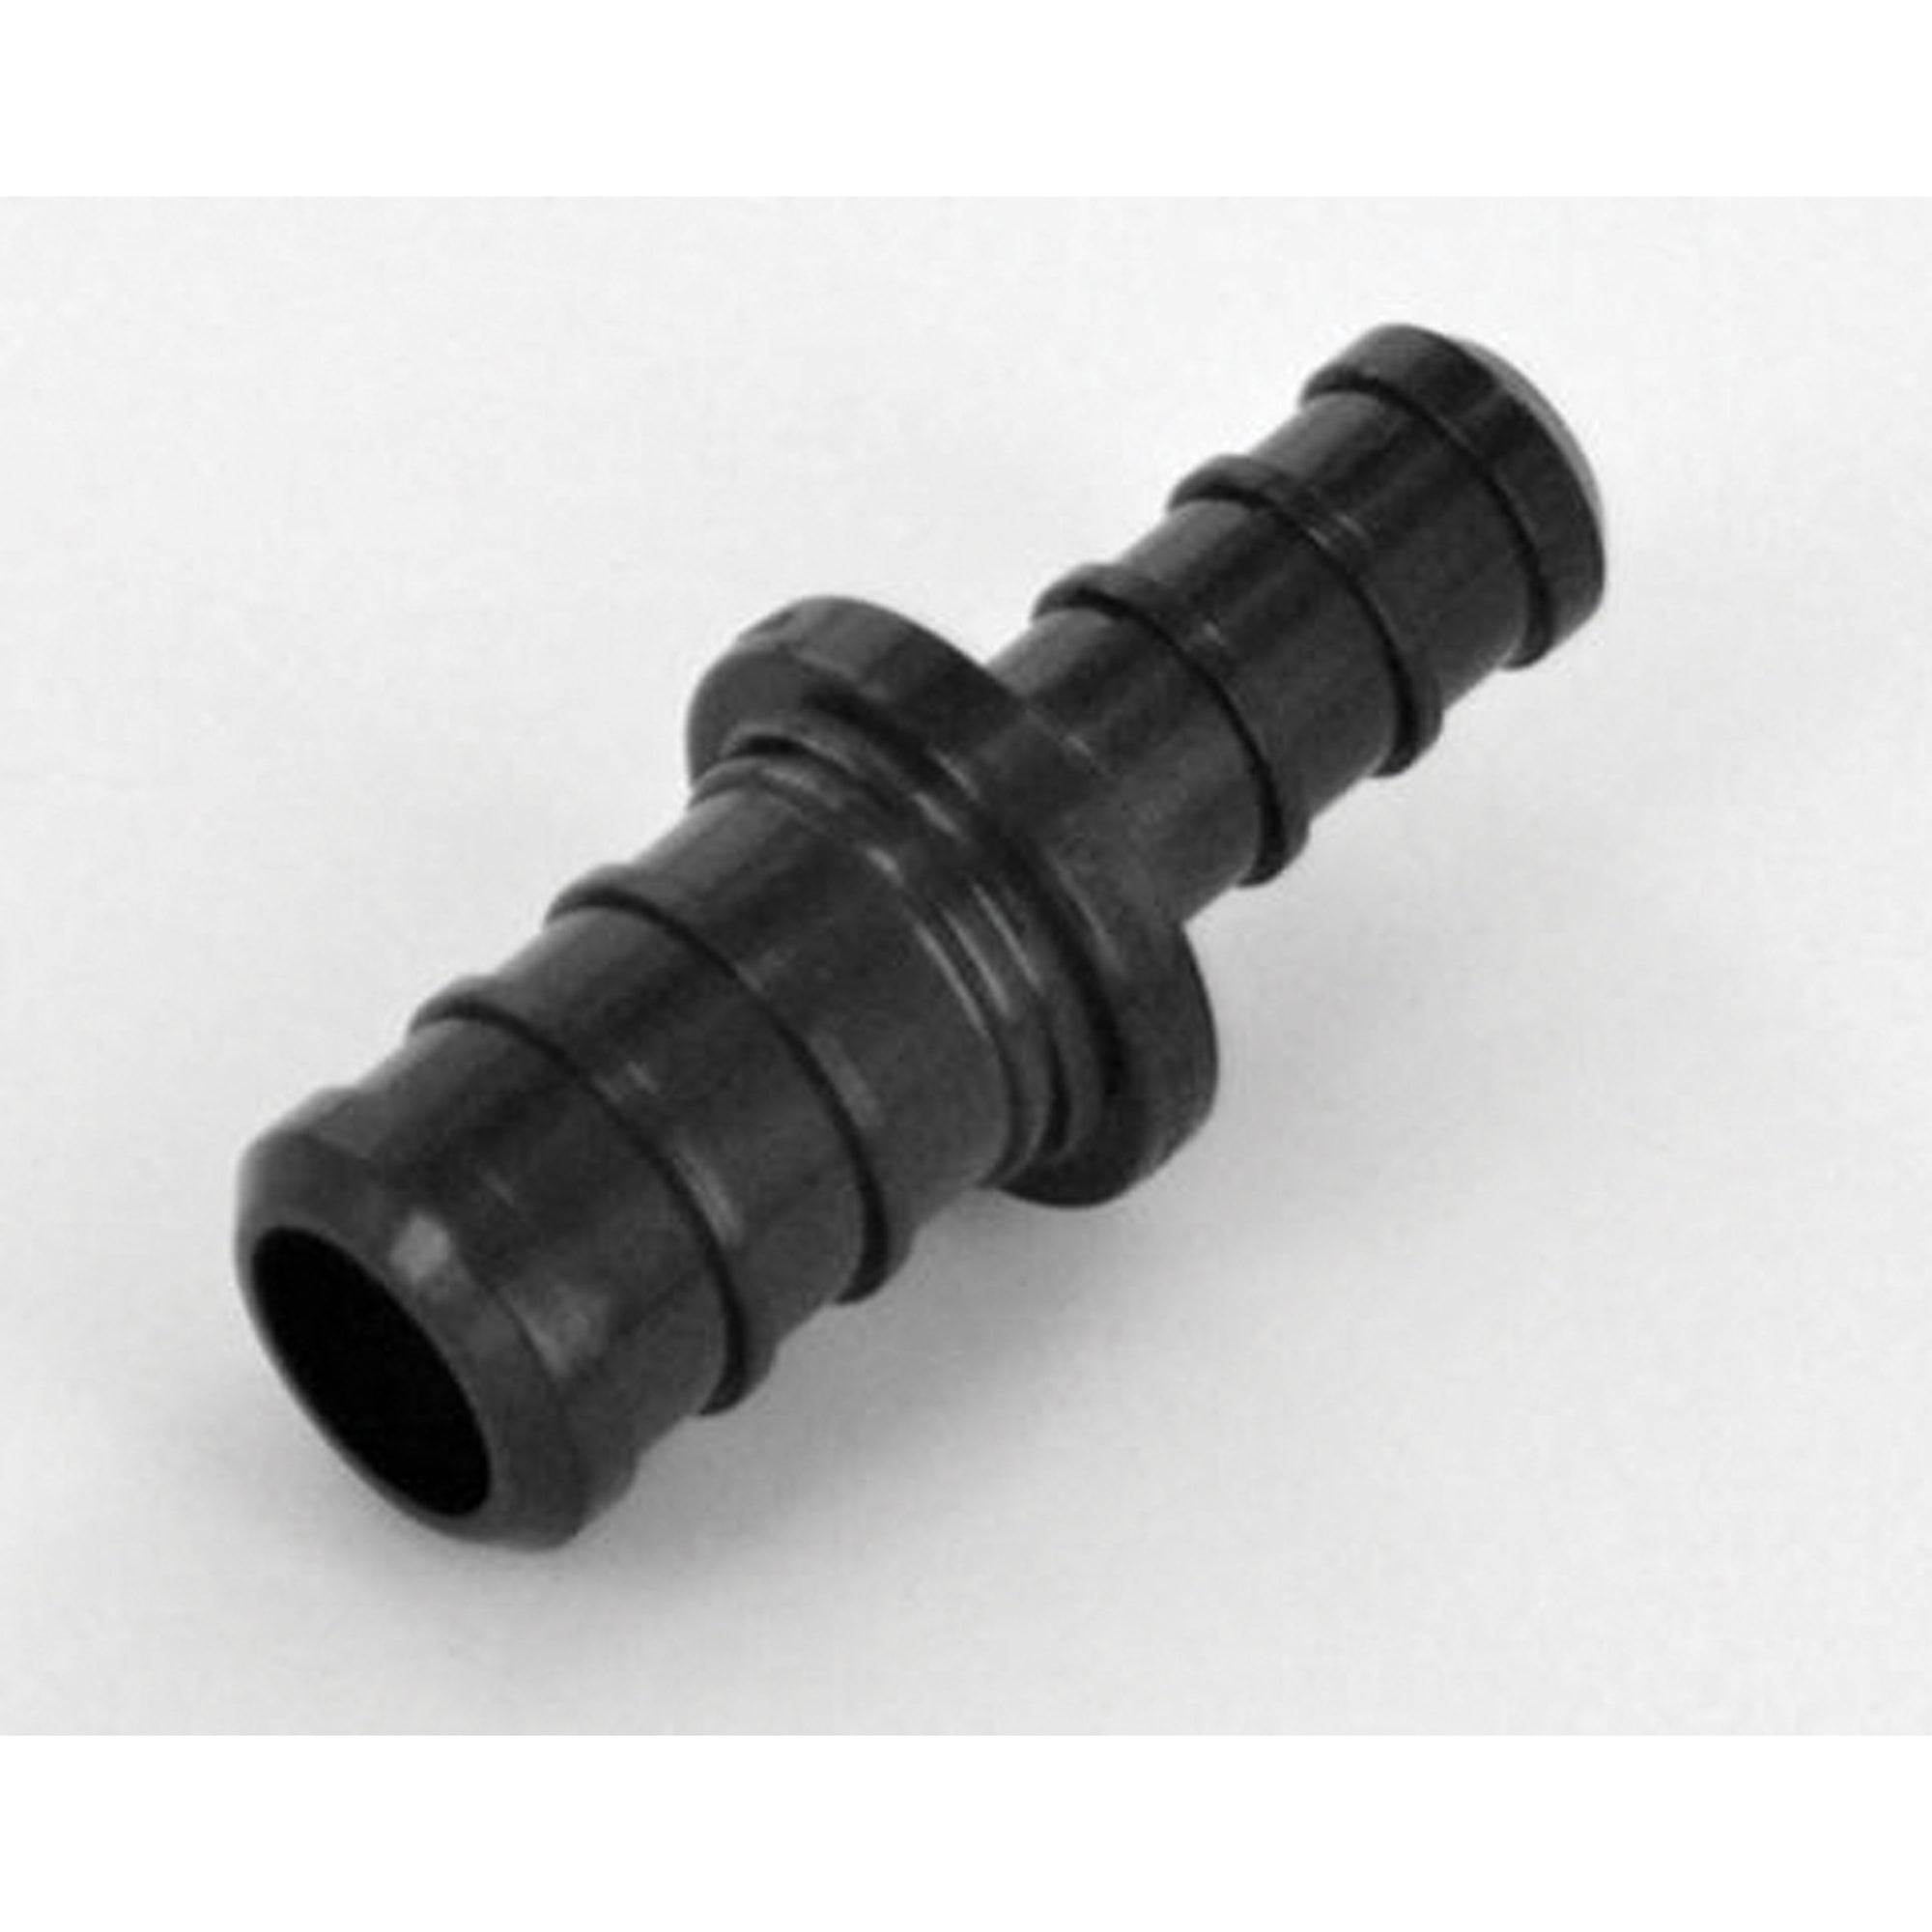 Flair-It 29853 1/2" X 3/8" Coupling